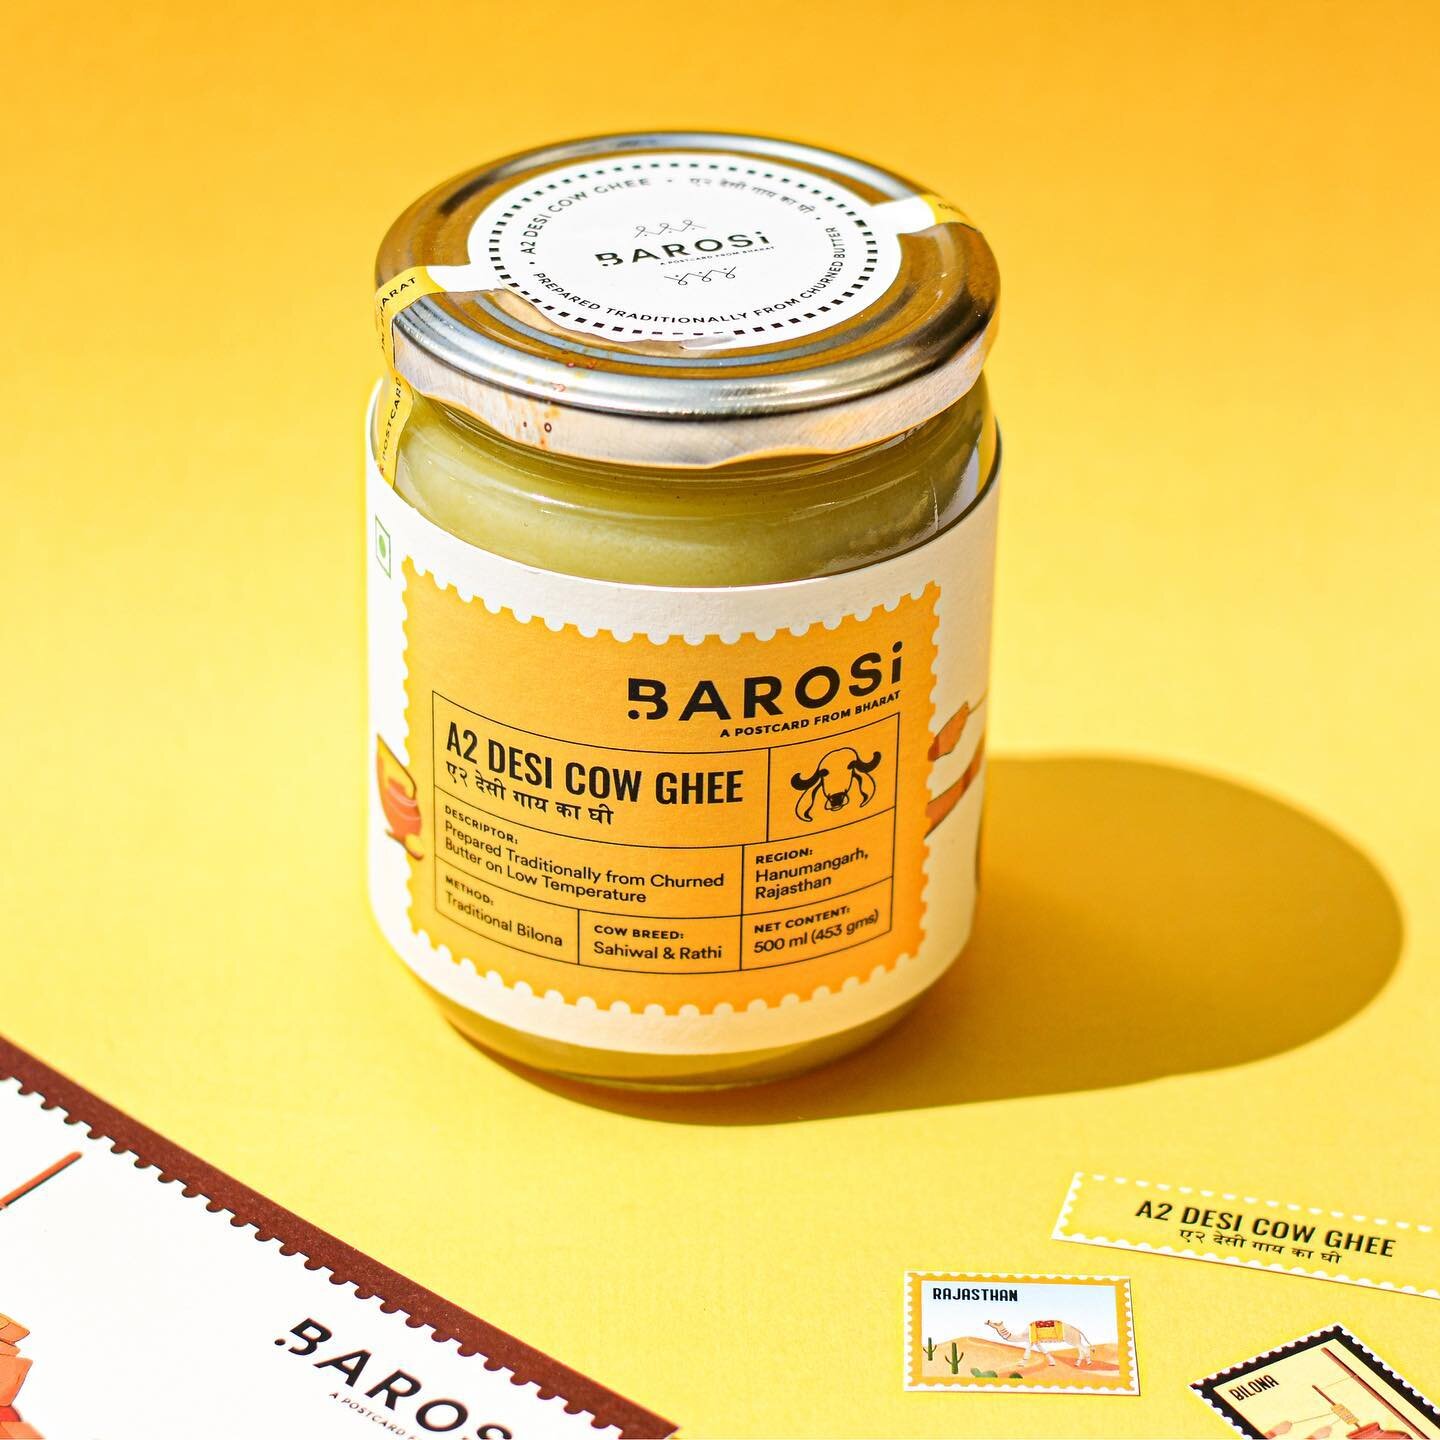 A postcard from Bharat! 

@barosifarms is a brand rooted in their traditions, filled with goodness, made authentically &amp; traditionally and truly good for you deserved their story to be told!
&bull;
&bull;
All Barosi&rsquo;s products are made in d